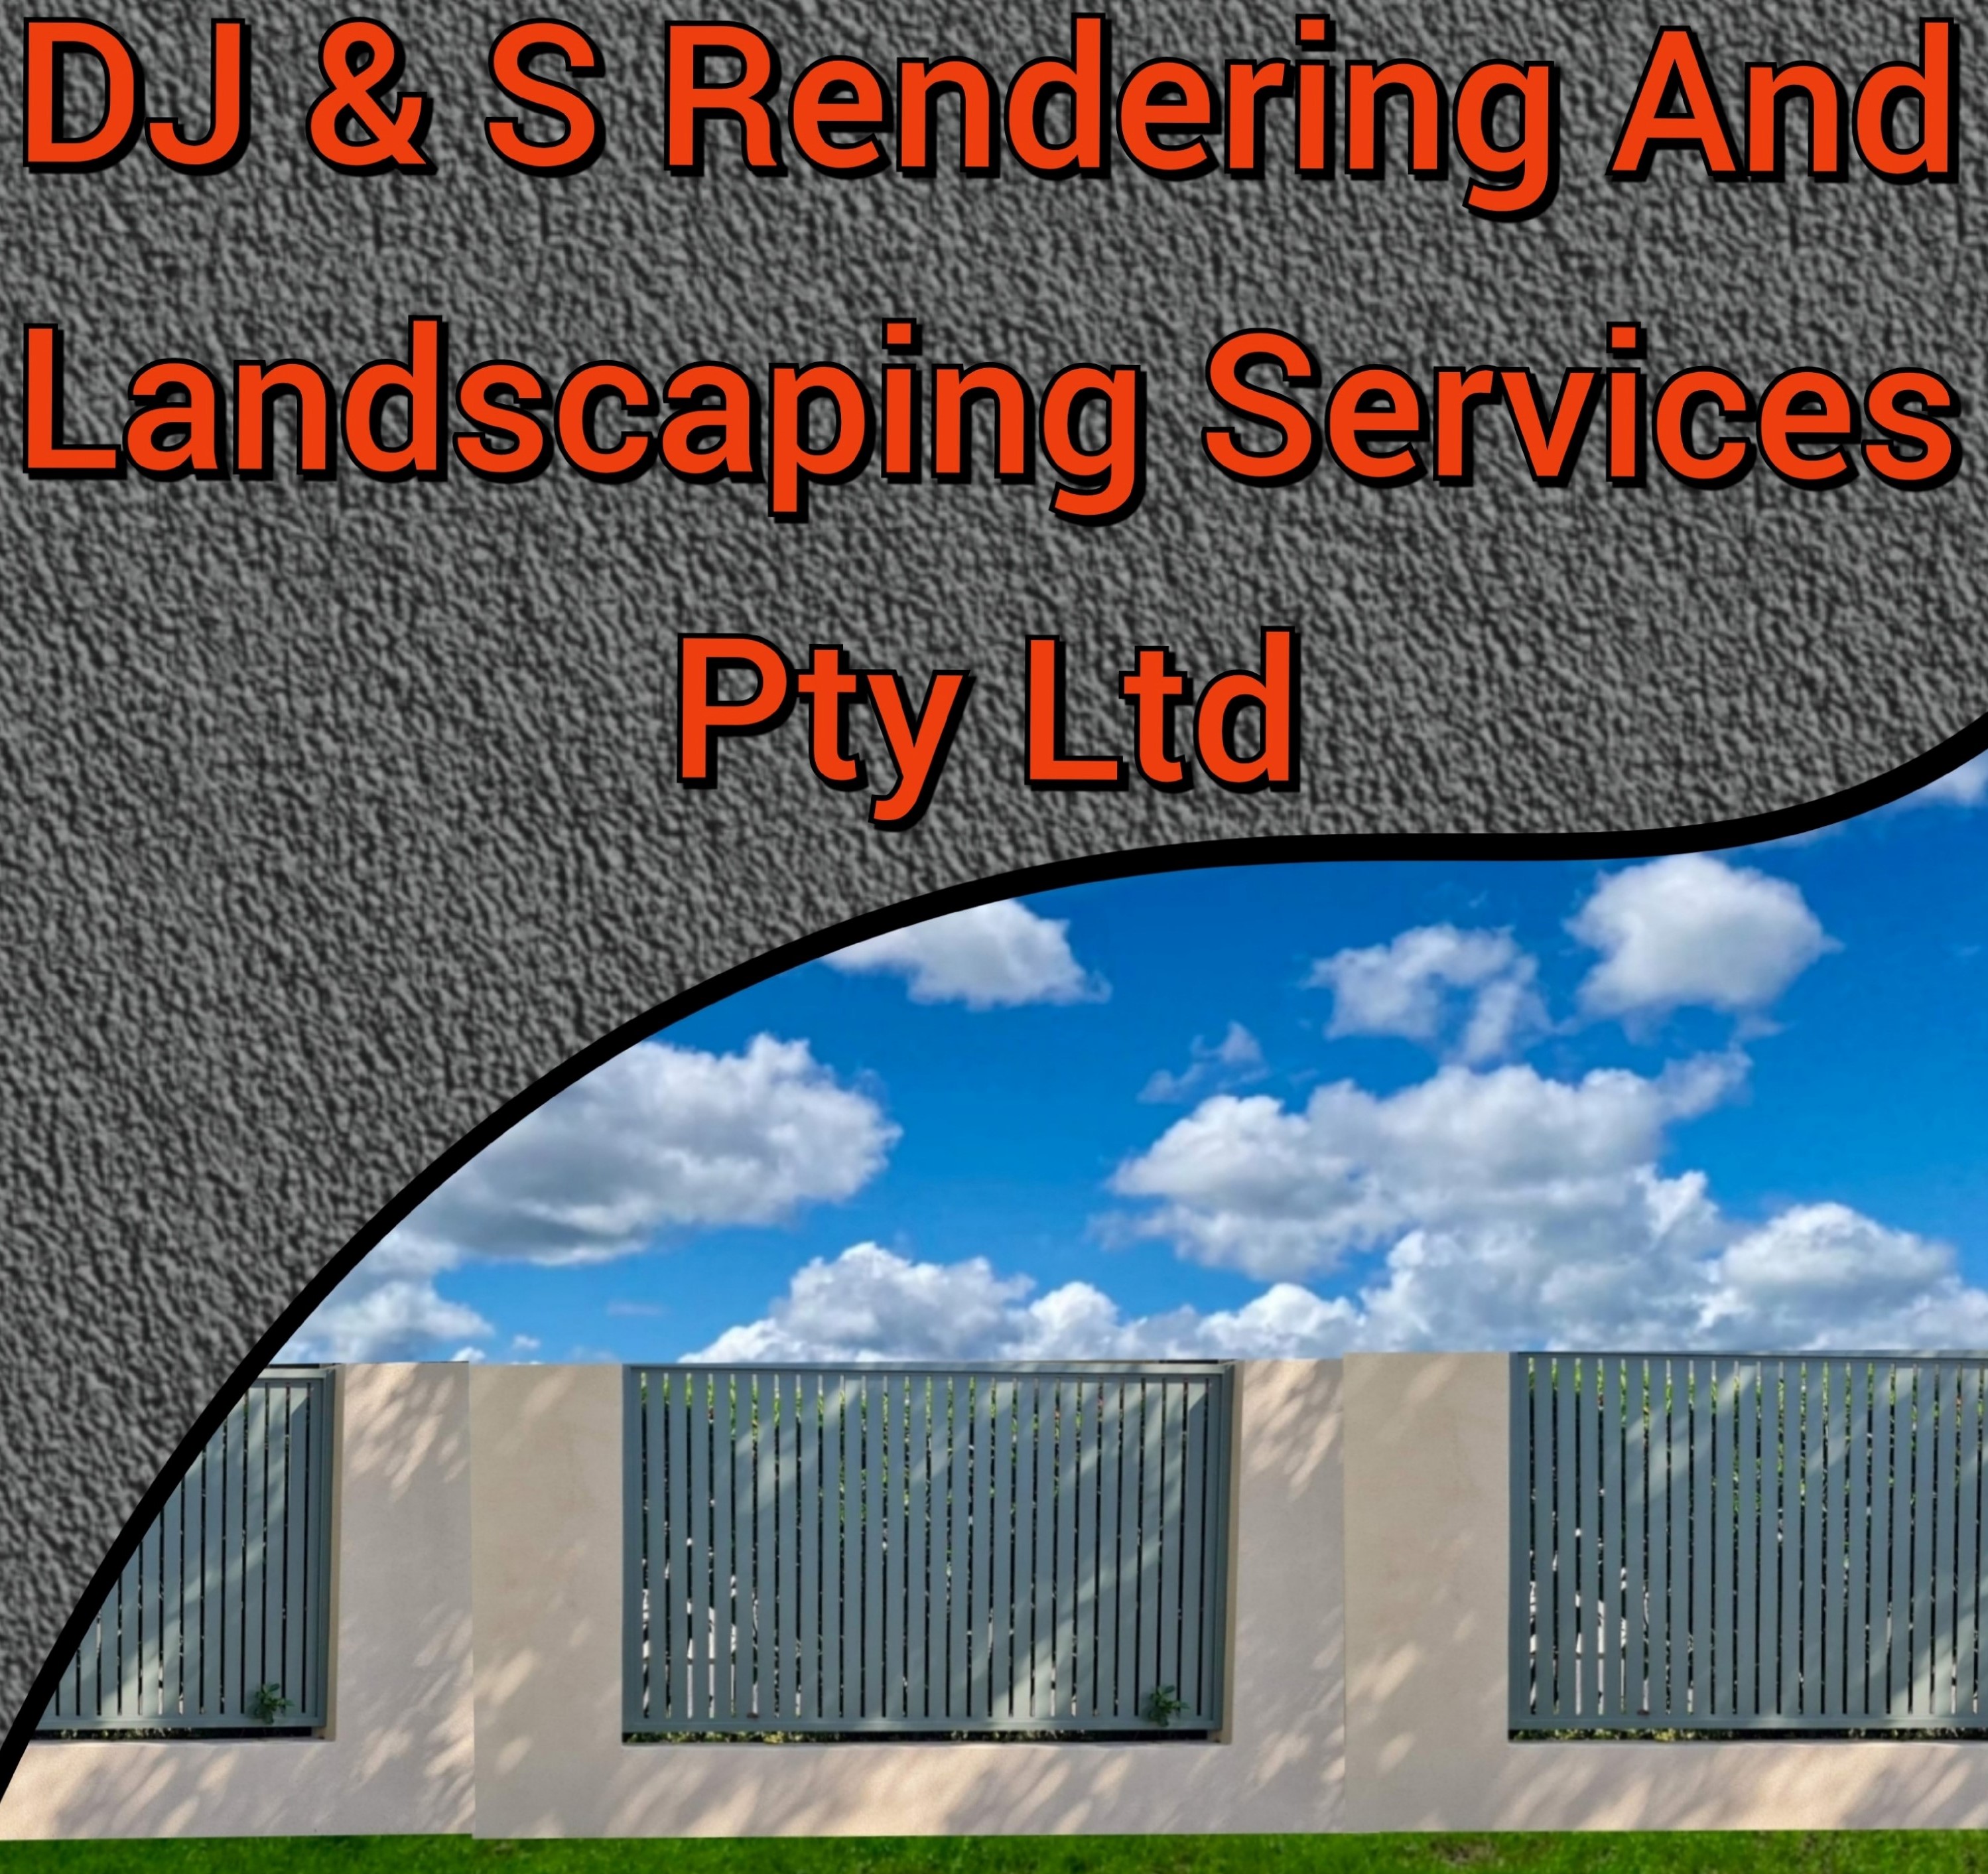 DJ and S Rendering and Landscaping Services Pty Ltd